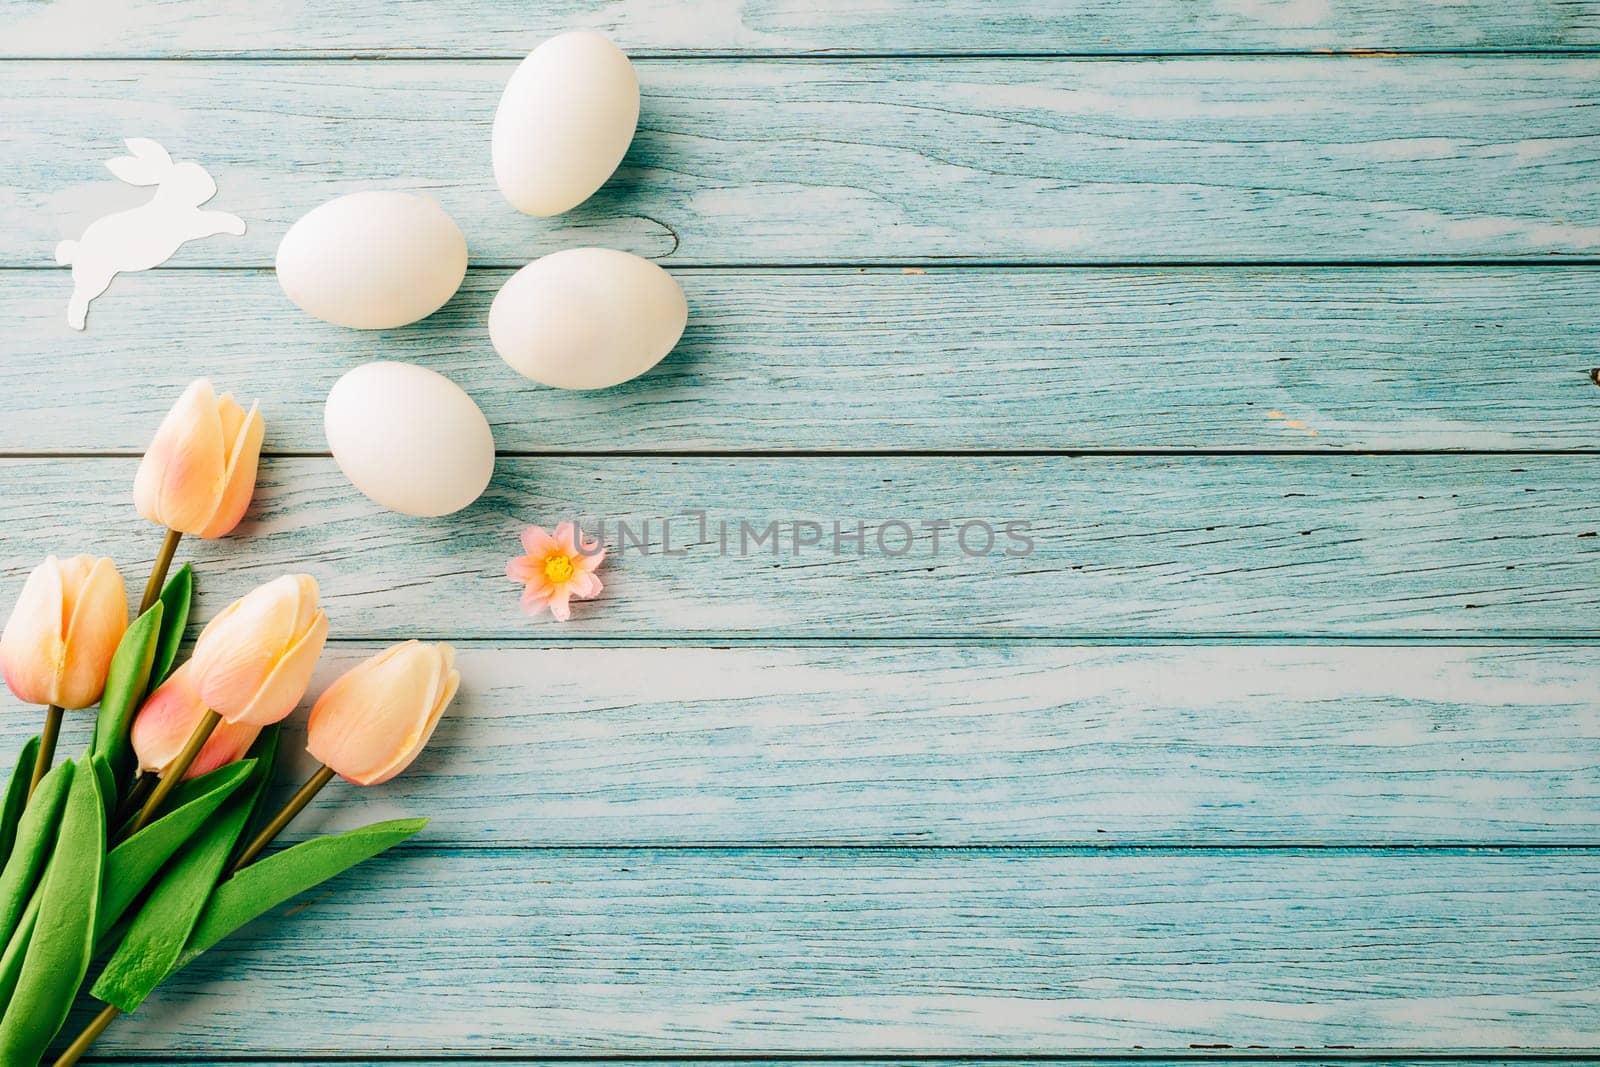 Happy Easter Day Concept. Flat lay of holiday banner background design white easter eggs and beautiful tulip flowers on blue wooden background with empty copy space, celebration greeting card